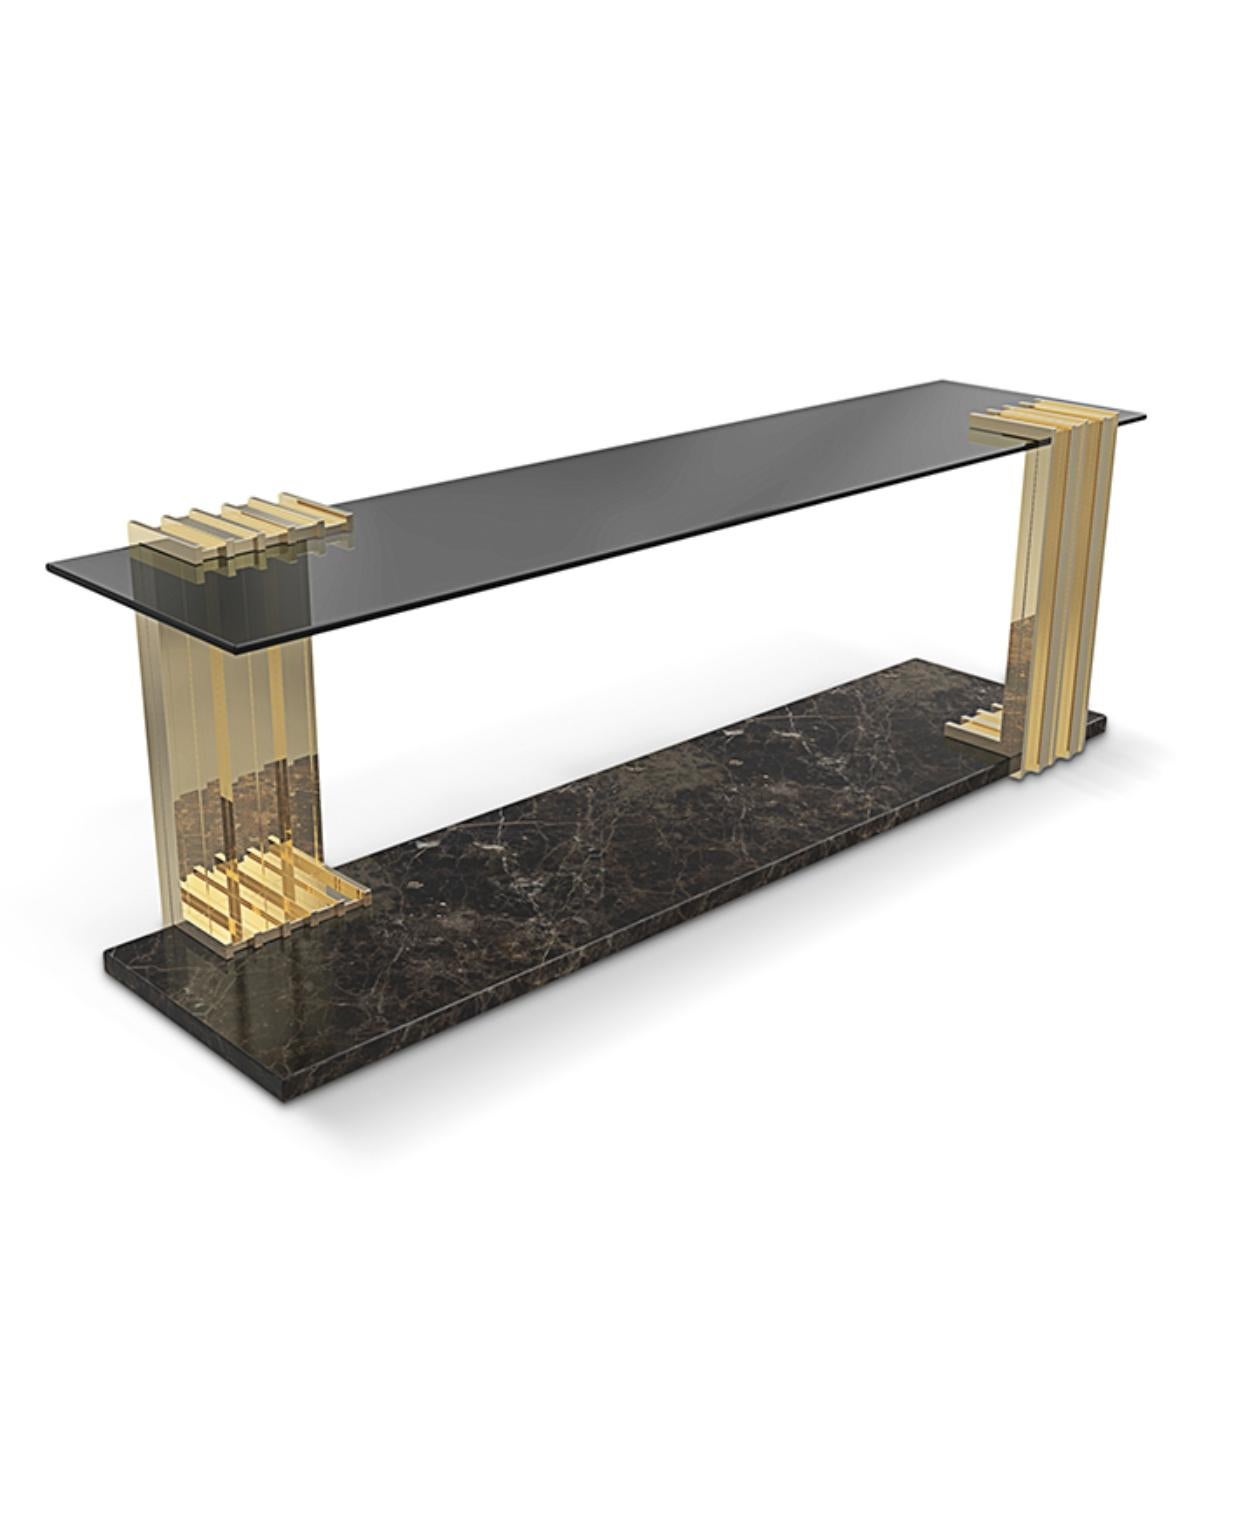 With a bold yet sophisticated design and the finest materials, Vertigo long side table upholds the sleek, sublime appeal of the Vertigo family. Its unique shape and brass, smoked glass, and Nero Marquina marble body draw attention and become the